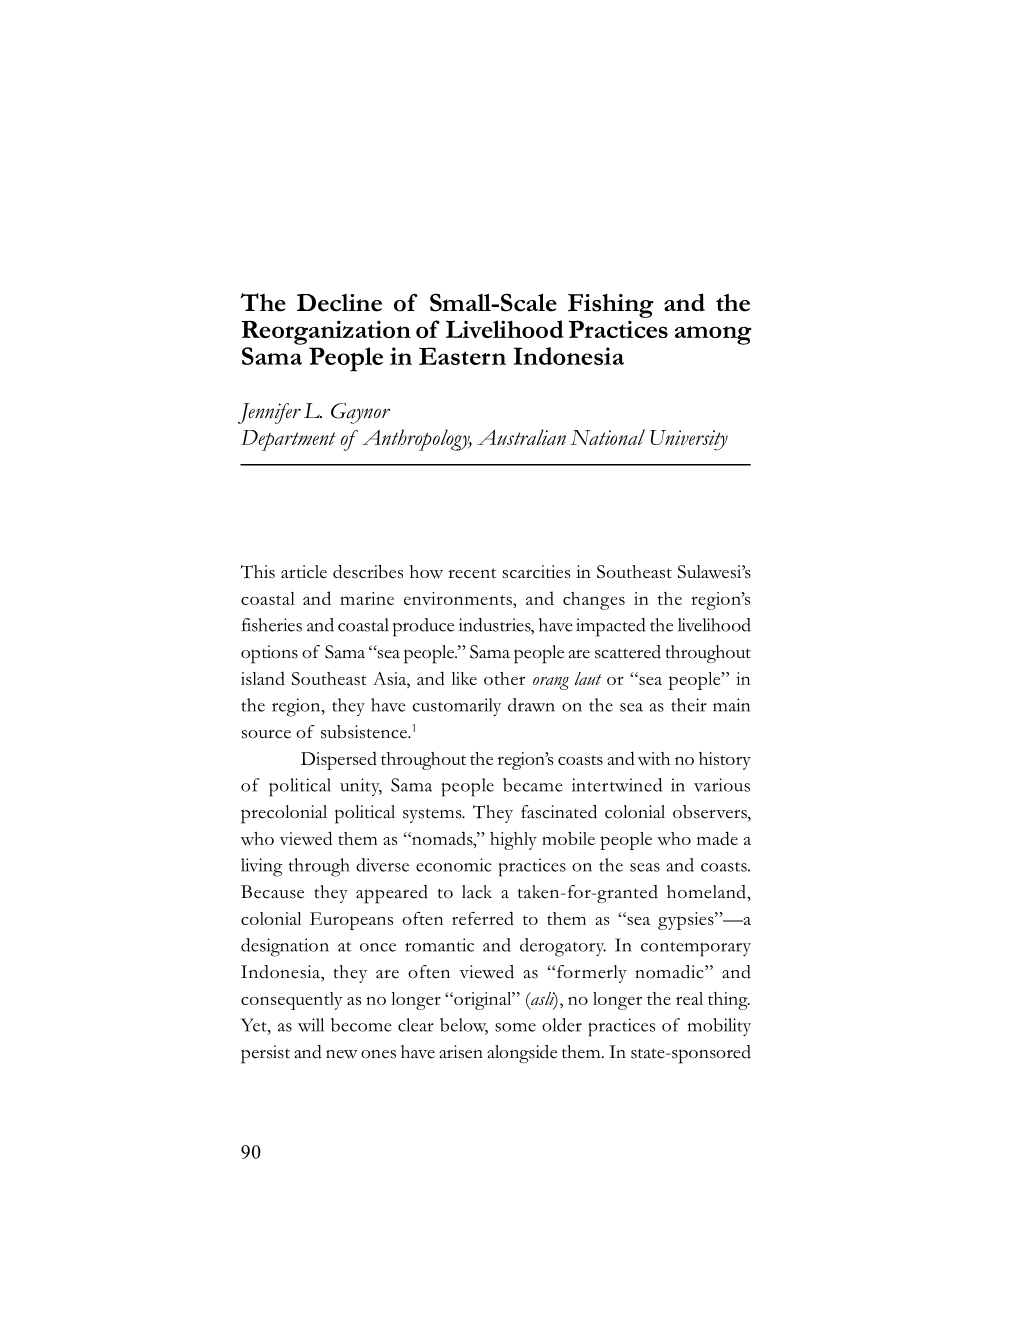 The Decline of Small-Scale Fishing and the Reorganization of Livelihood Practices Among Sama People in Eastern Indonesia